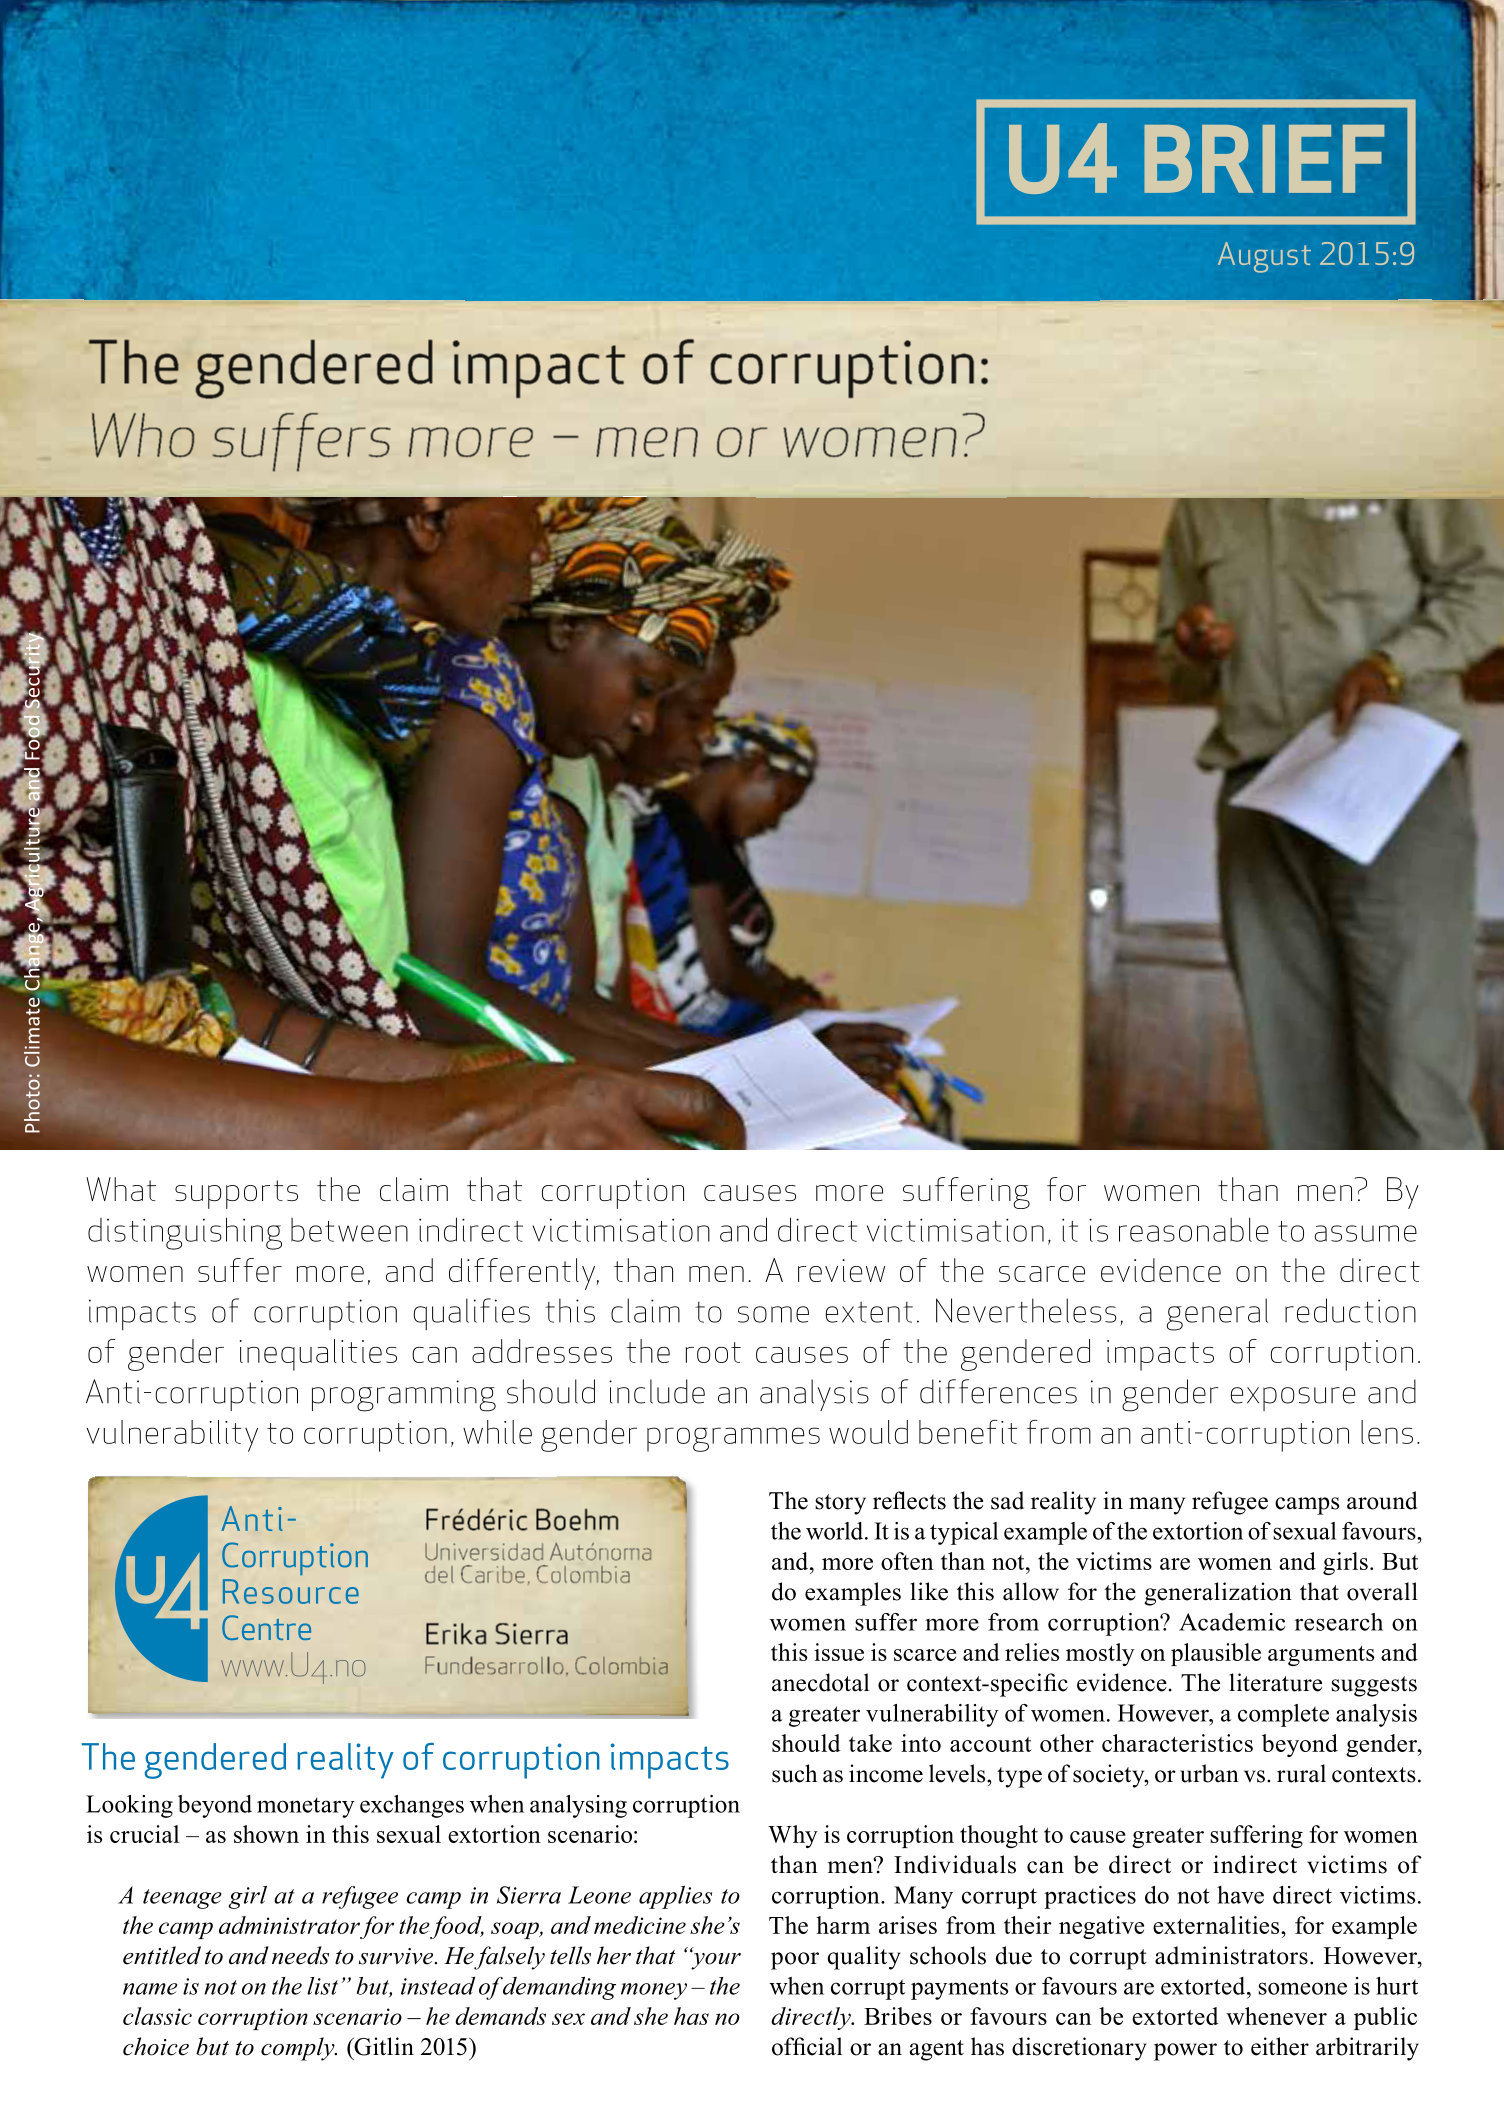 The gendered impact of corruption: Who suffers more – men or women?